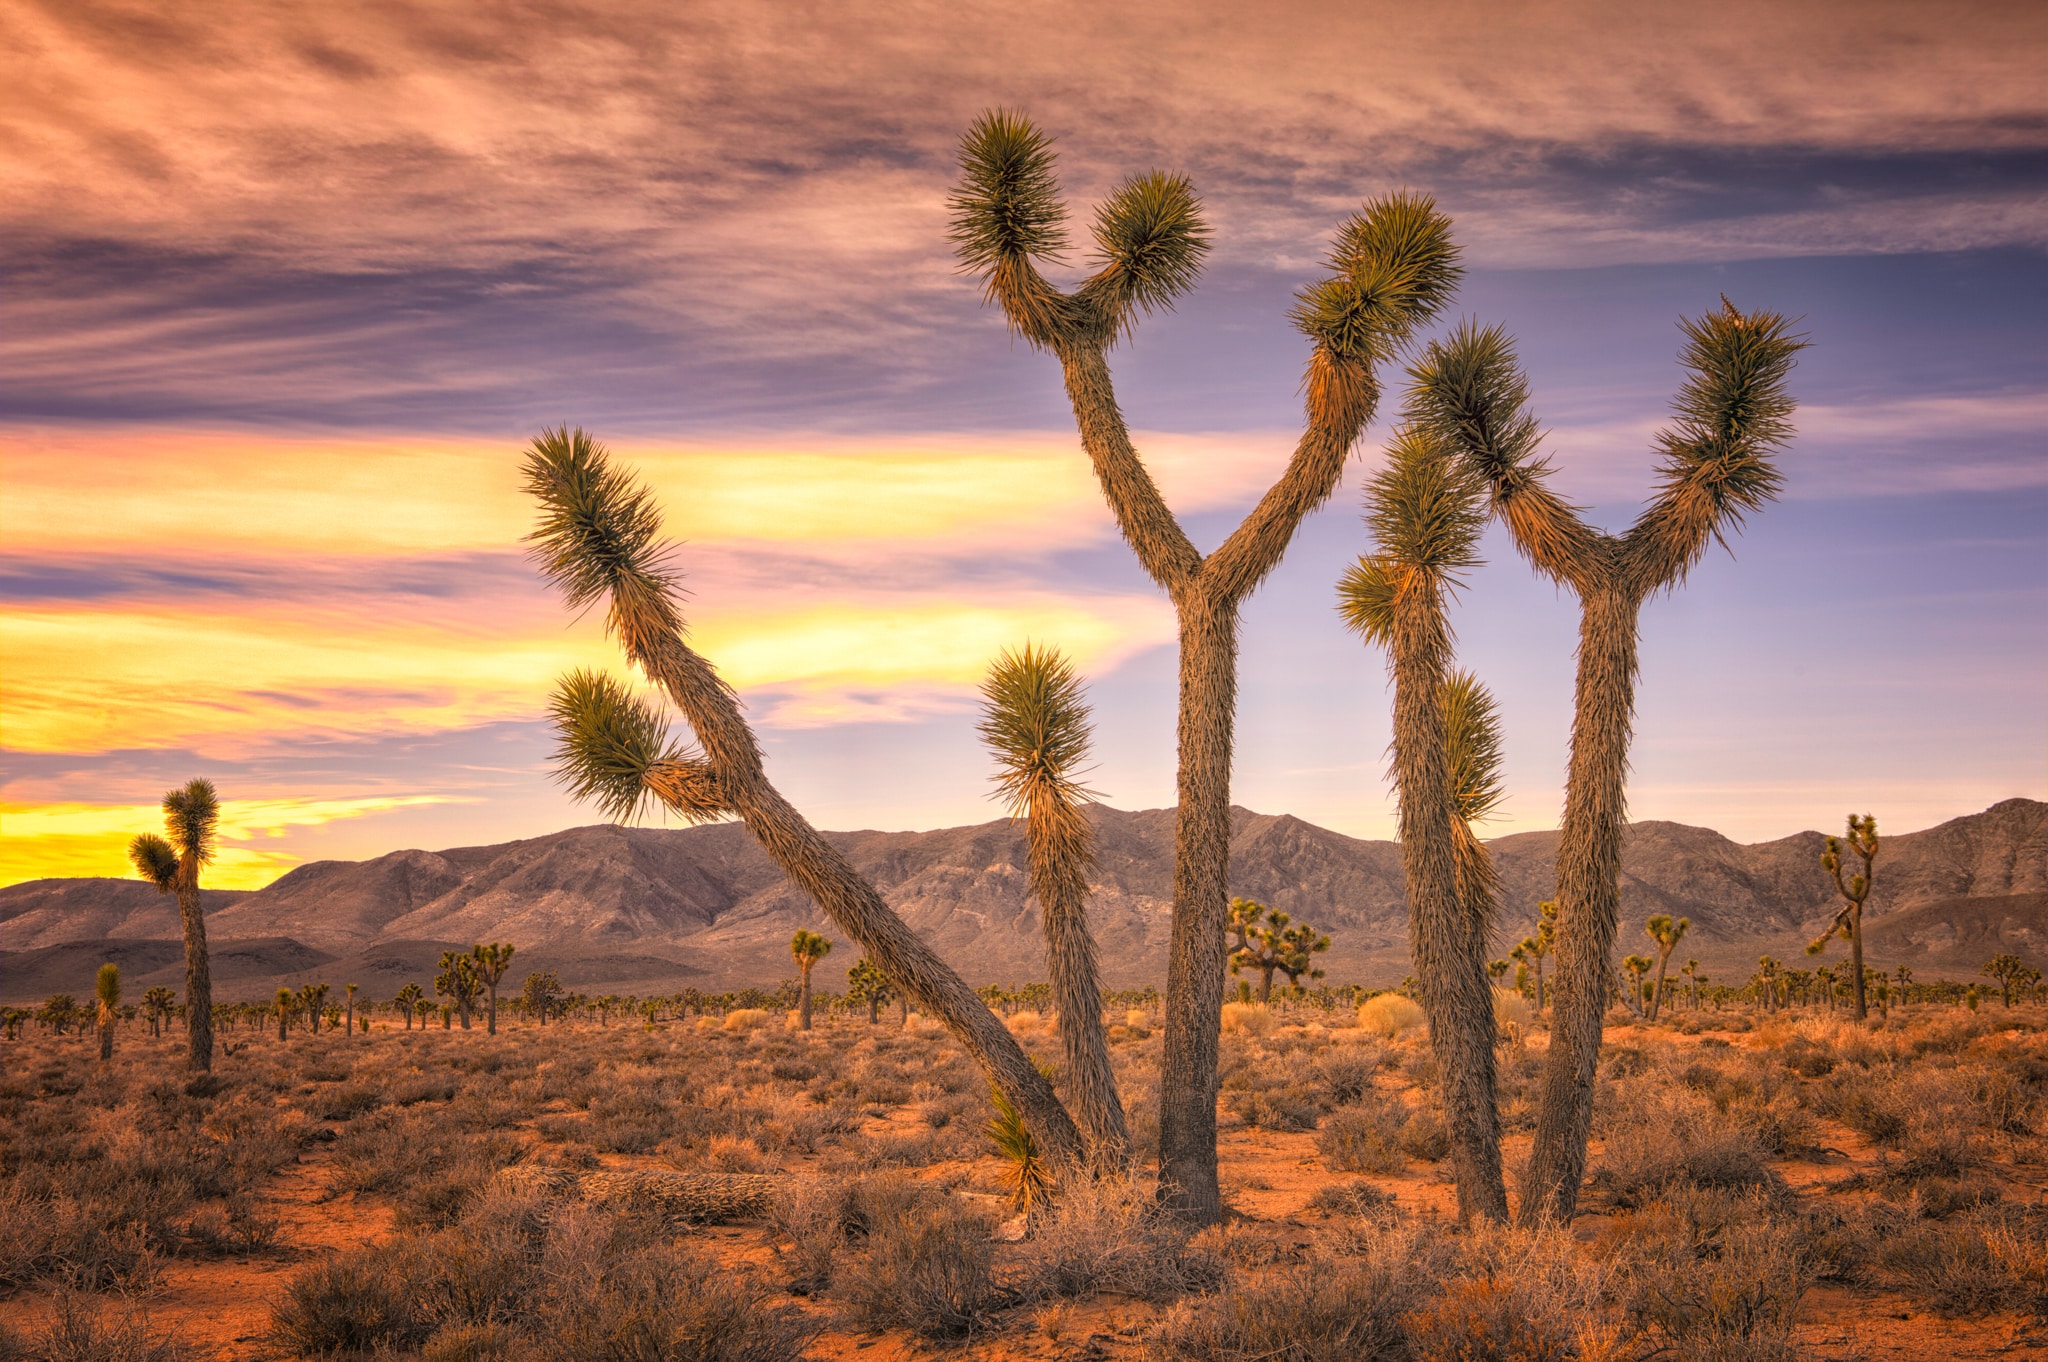 There is a forest of Joshua Trees in the Lee Flat area of Death Valley National Park, which is accessible from the Saline Valley Road off Highway 190 north of Father Crowley Point.